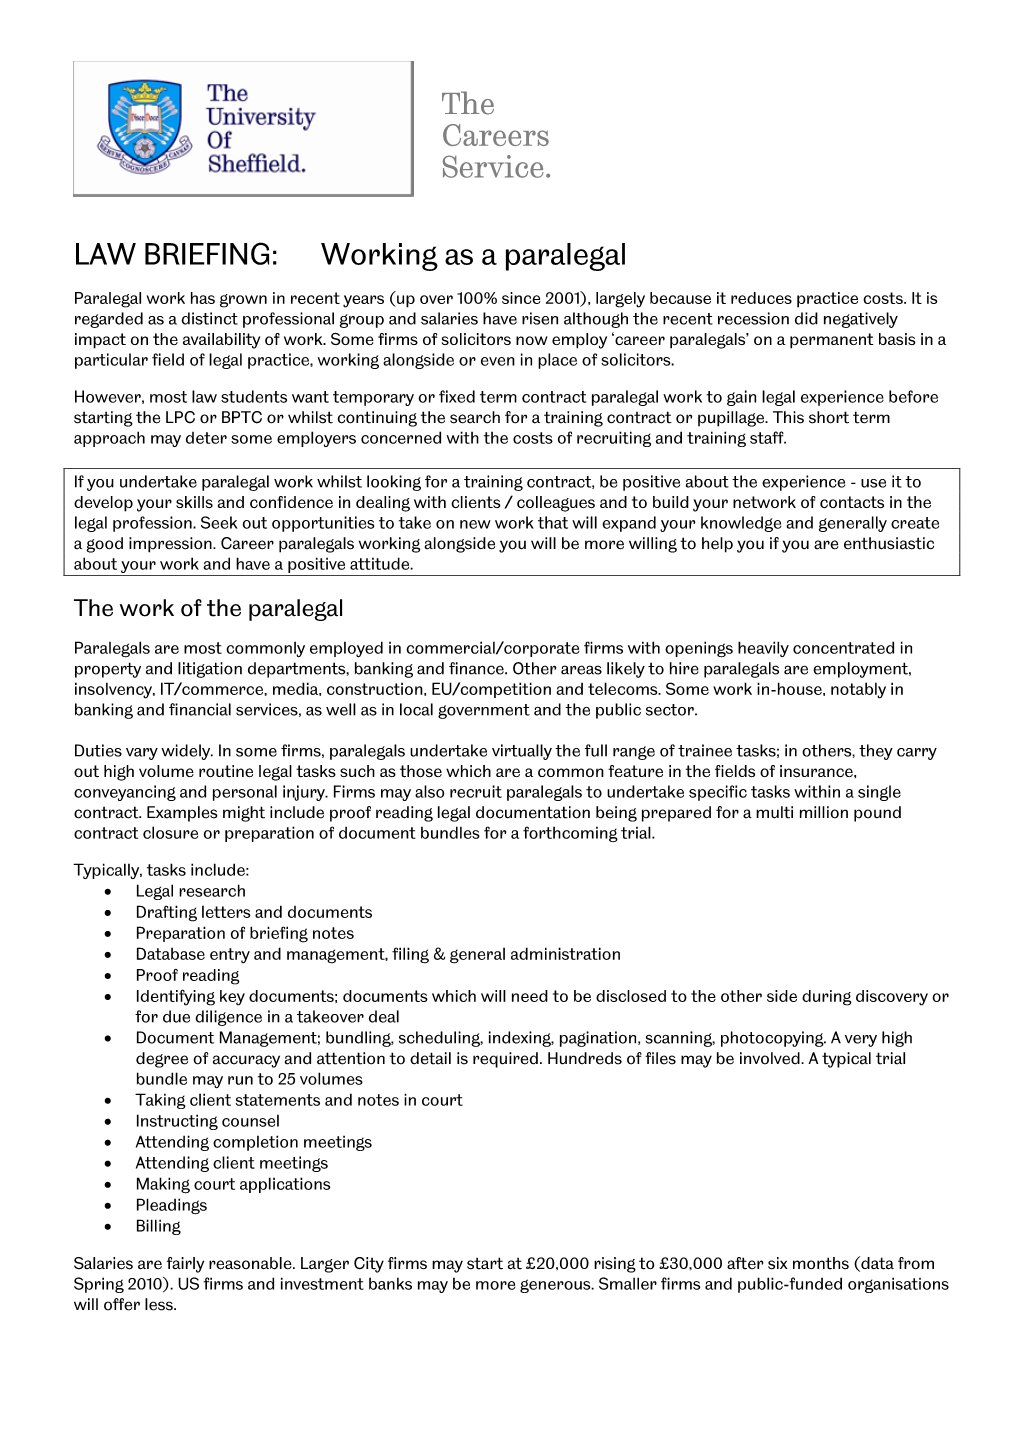 Law Briefings – Working As a Paralegal